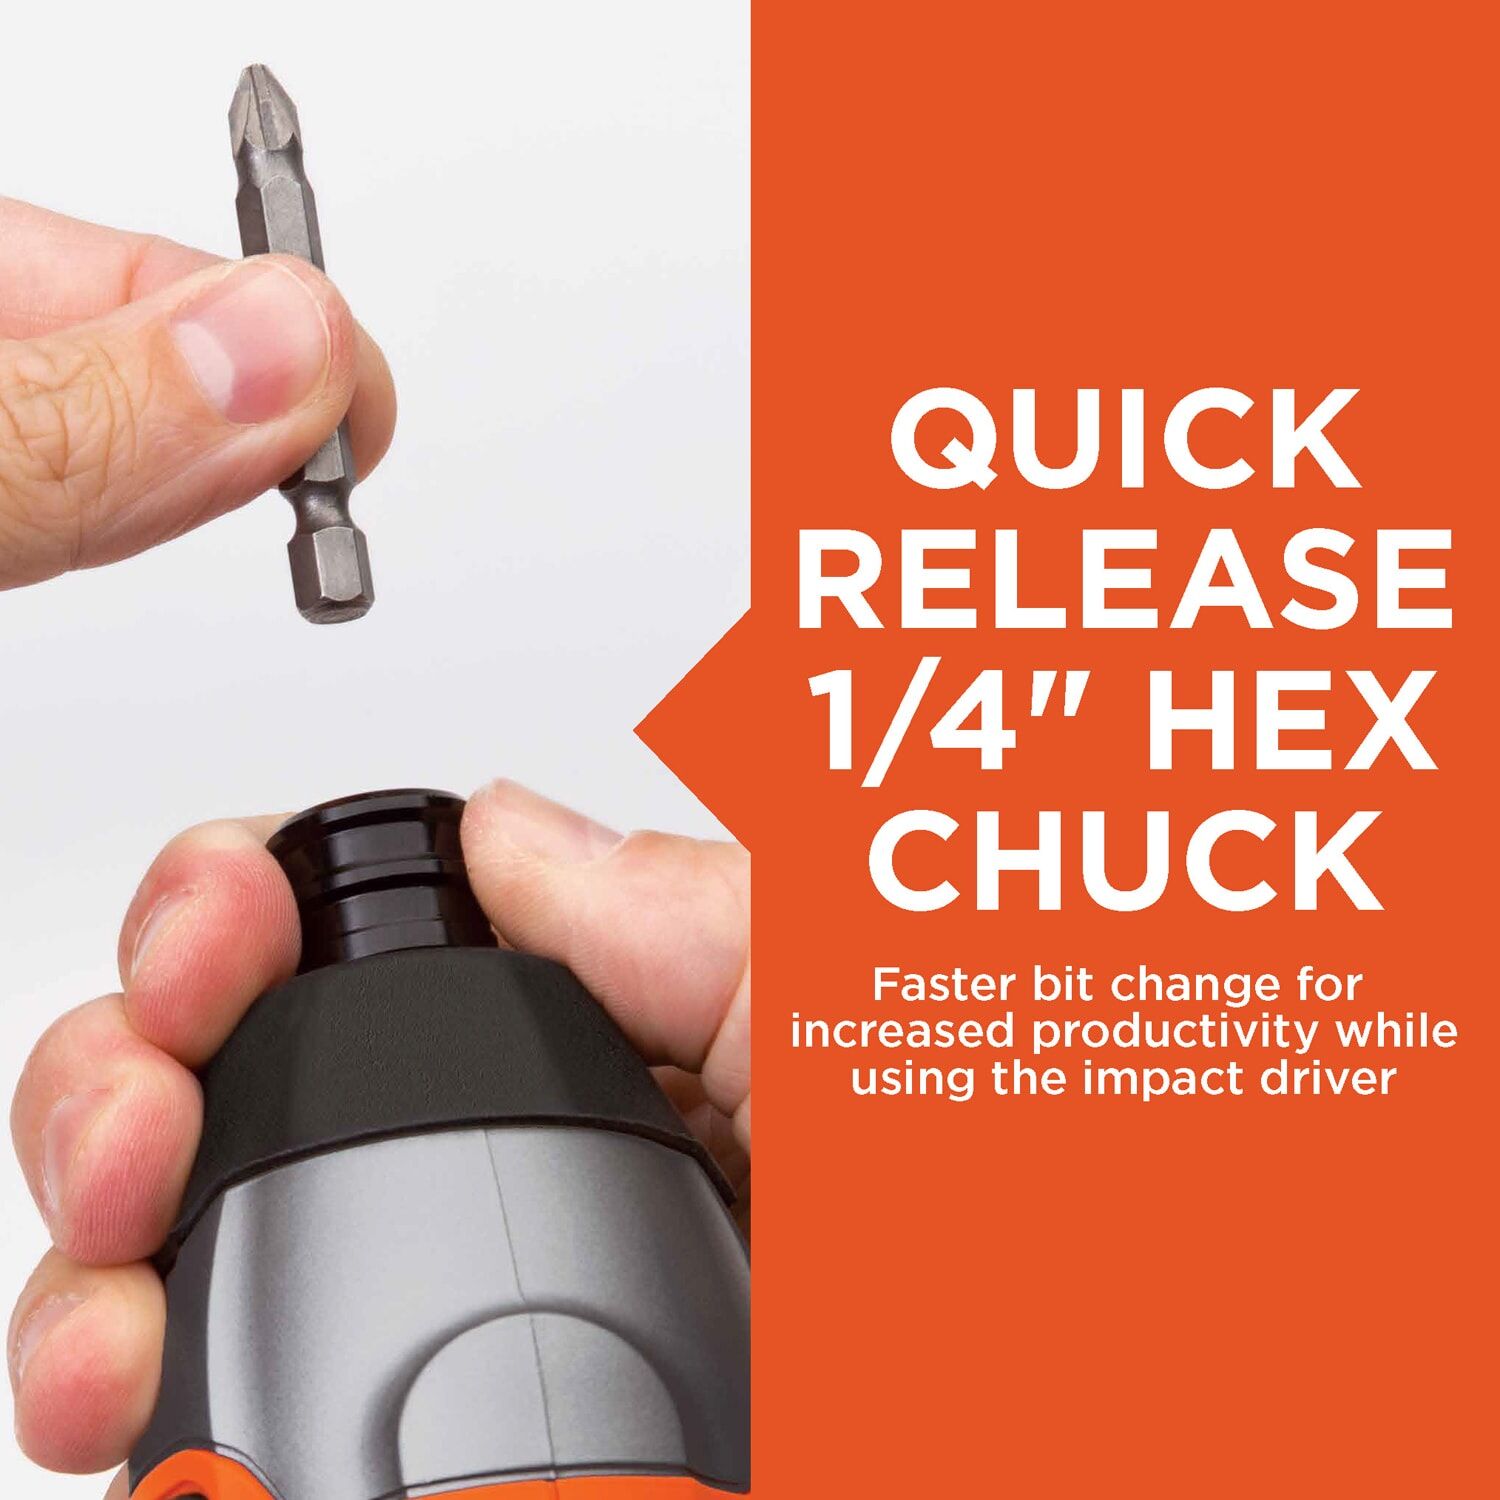 Black and Decker impact driver has a quick release one quarter inch hex chuck